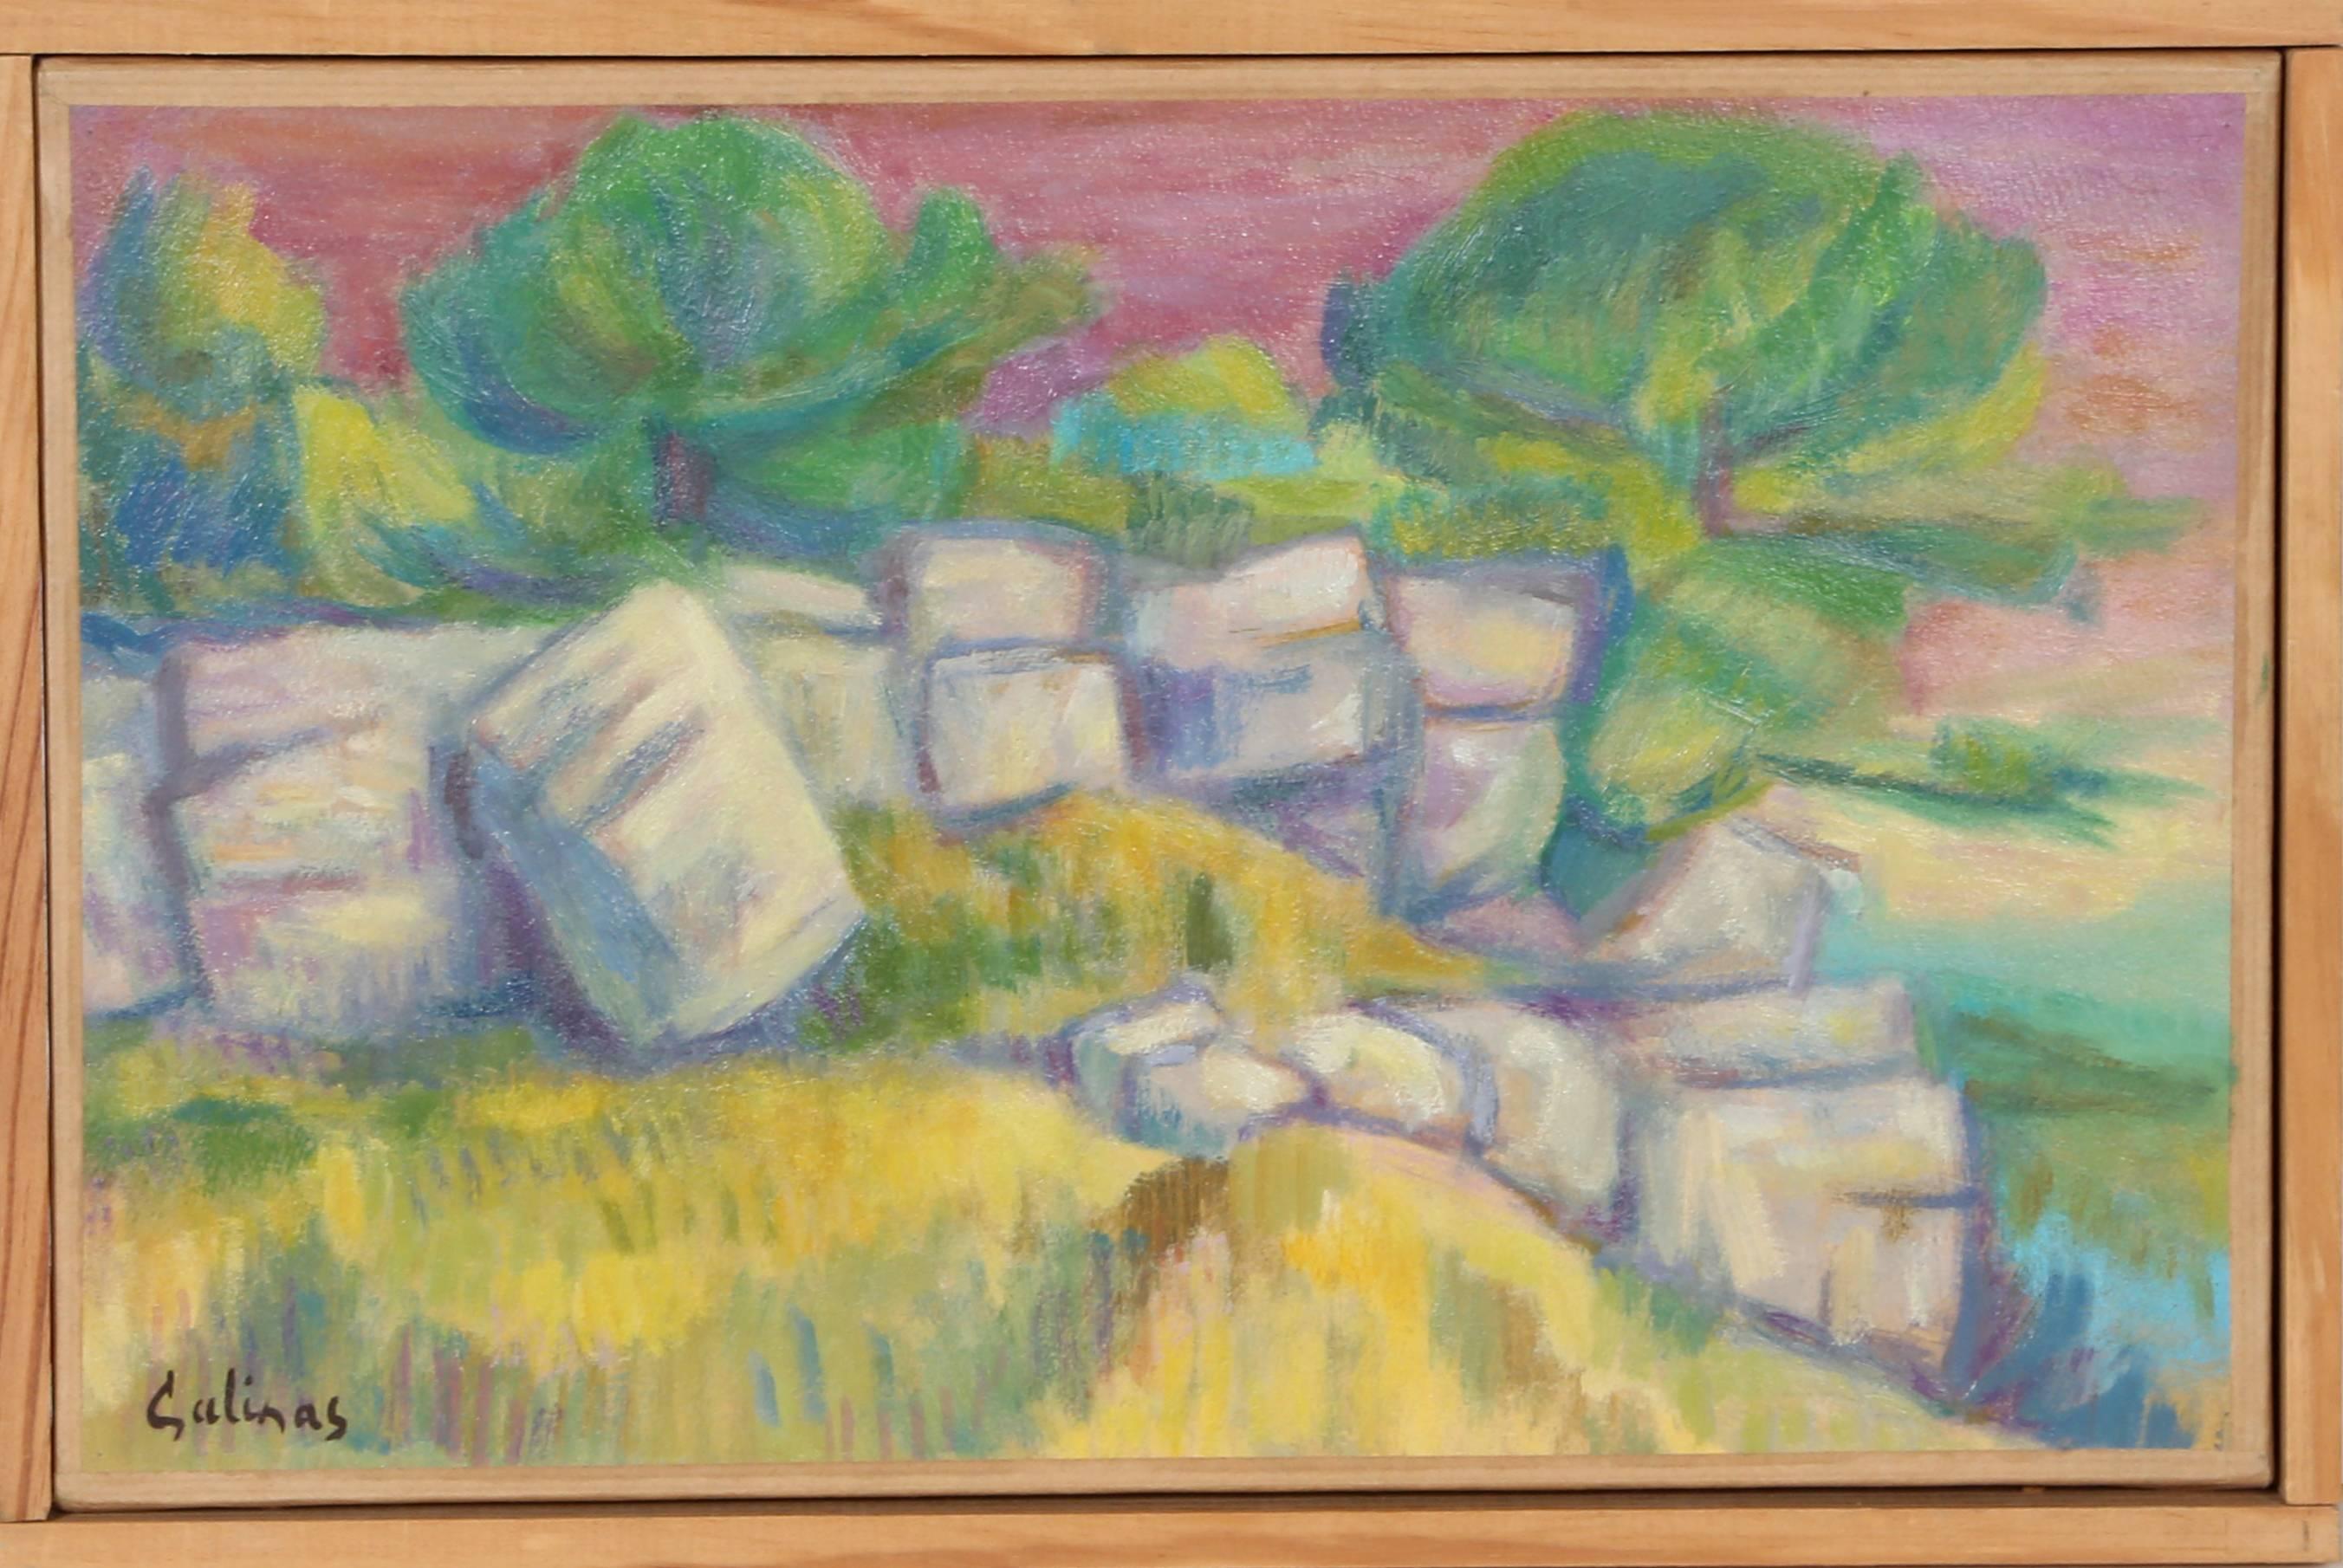 Artist: Laurent Marcel Salinas, French (1913 - 2010)
Title: Rochers A La Cadiere D'Azur
Medium: Oil on Wood, signed
Image Size: 9 x 14.5 inches
Frame Size: 10.5 x 16 inches